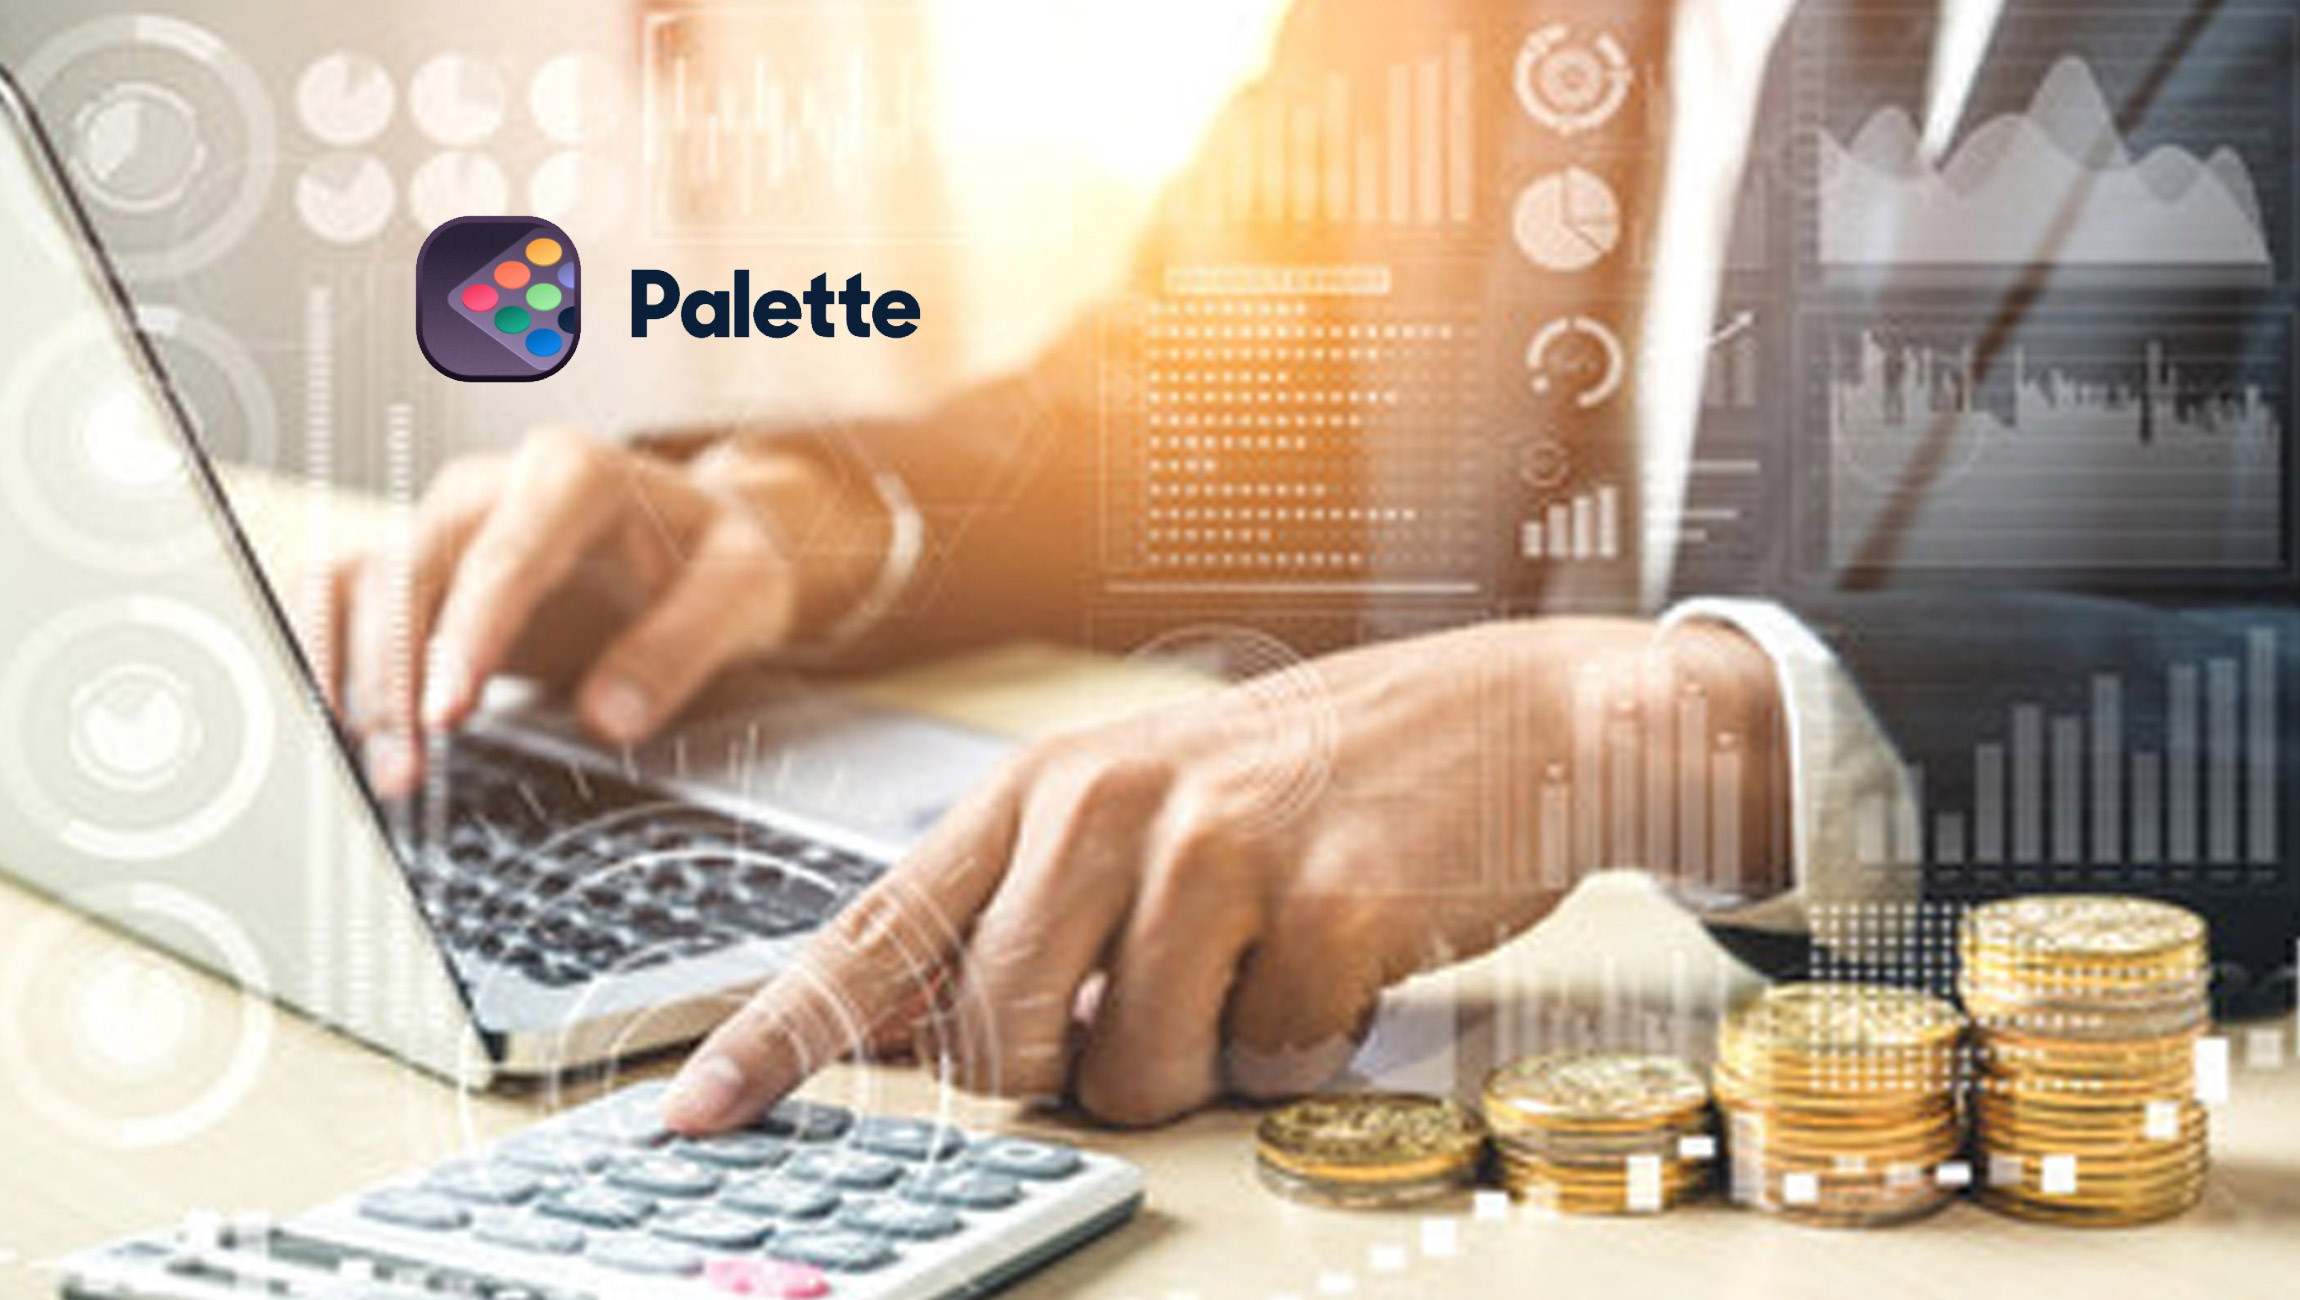 Palette Raises $6M Led by Bain Capital Ventures to Help Finance and Operations Teams Design, Manage, and Automate Sales Commissions